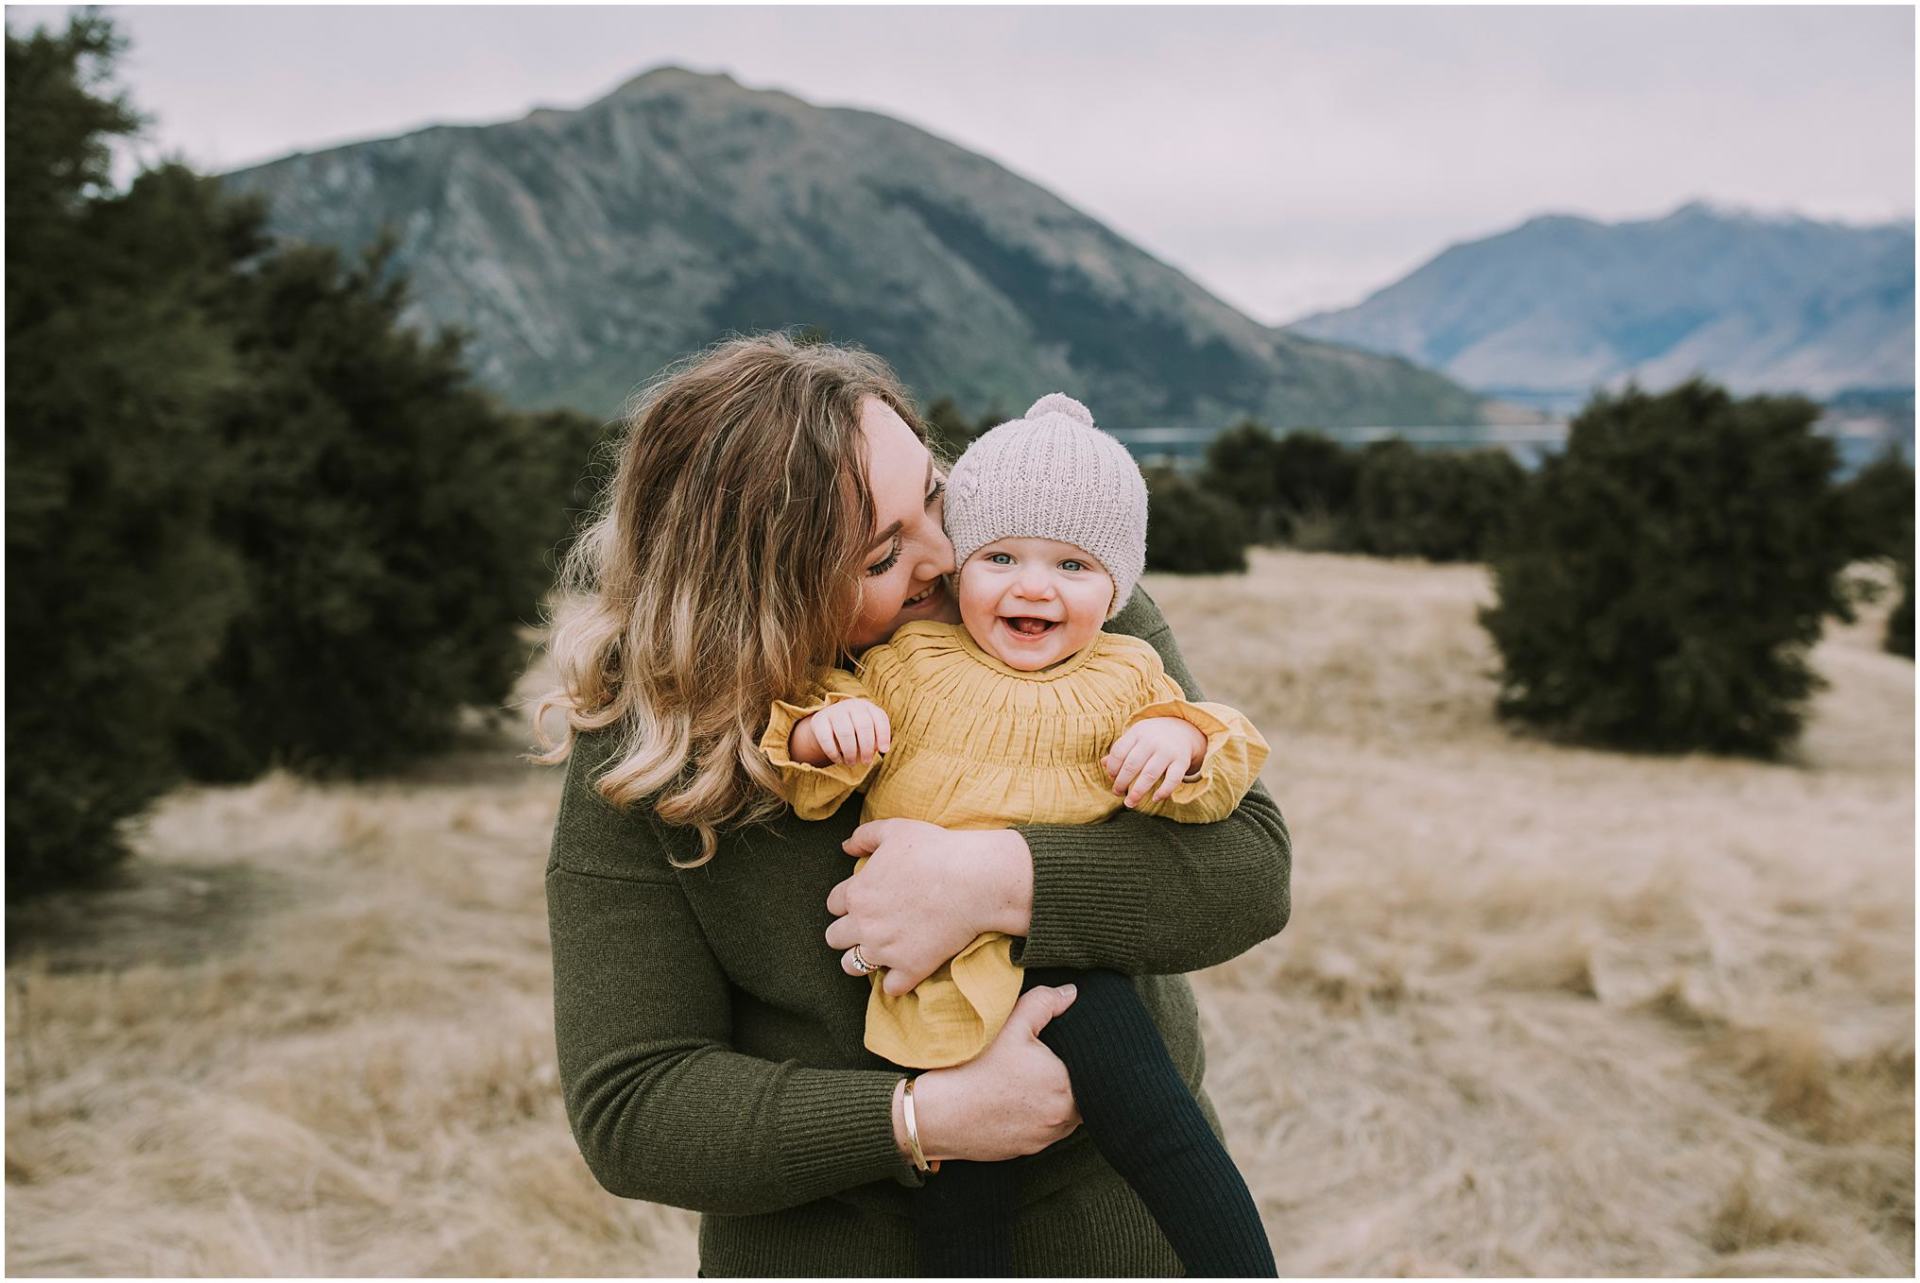 Charlotte Kiri Photography - Family Photography of a mother snuggling into her child as they laugh joyfully in her arms, in a field with mountains behind in Wanaka, New Zealand.